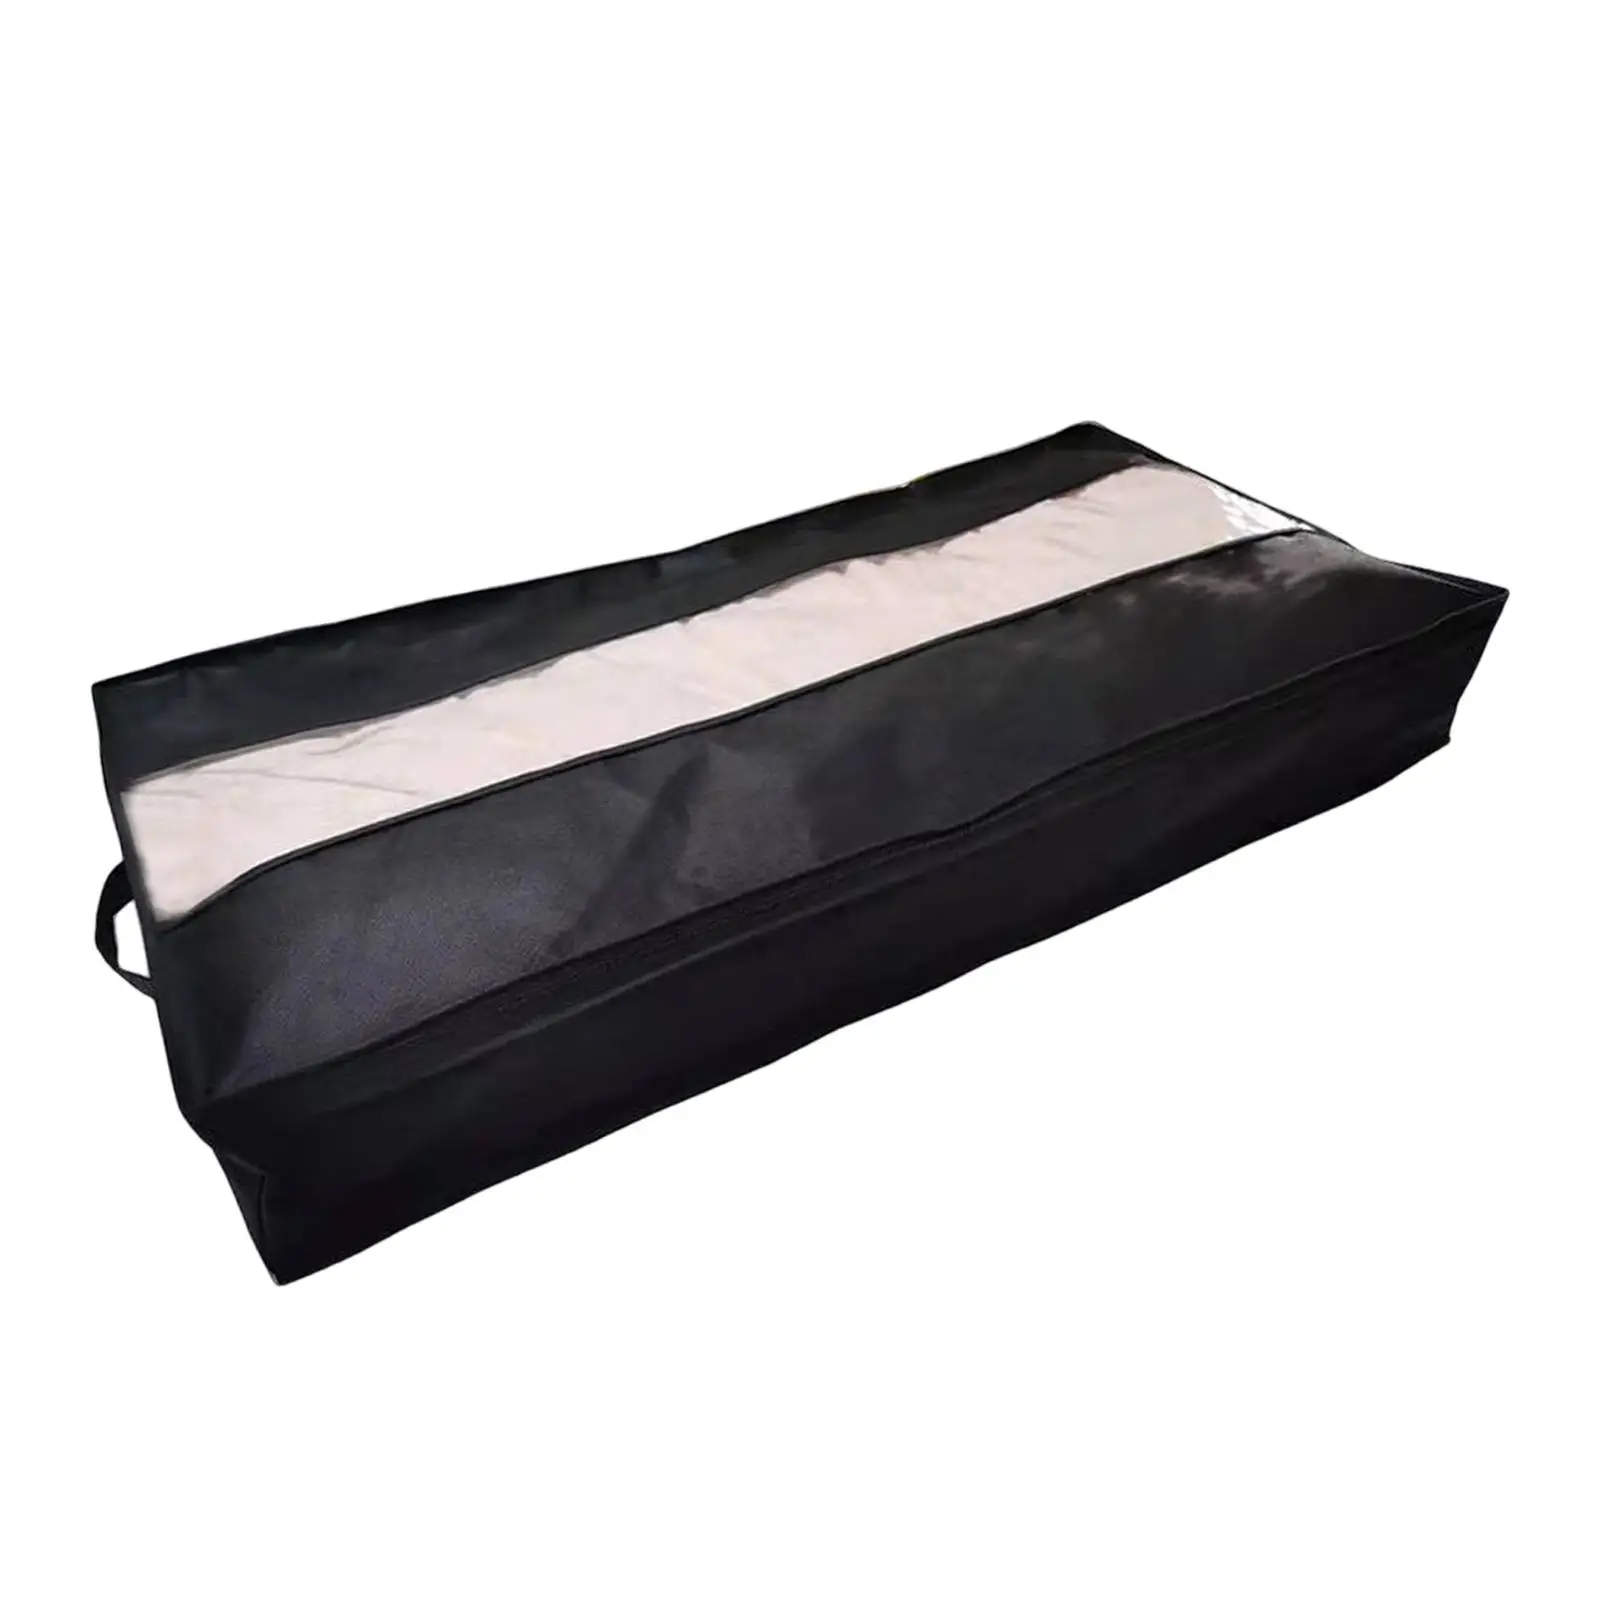 Comforter Storage Bag See through Front Panel Large Capacity and Sturdy Zipper for Comforters Quilts Blankets Clothing Linen